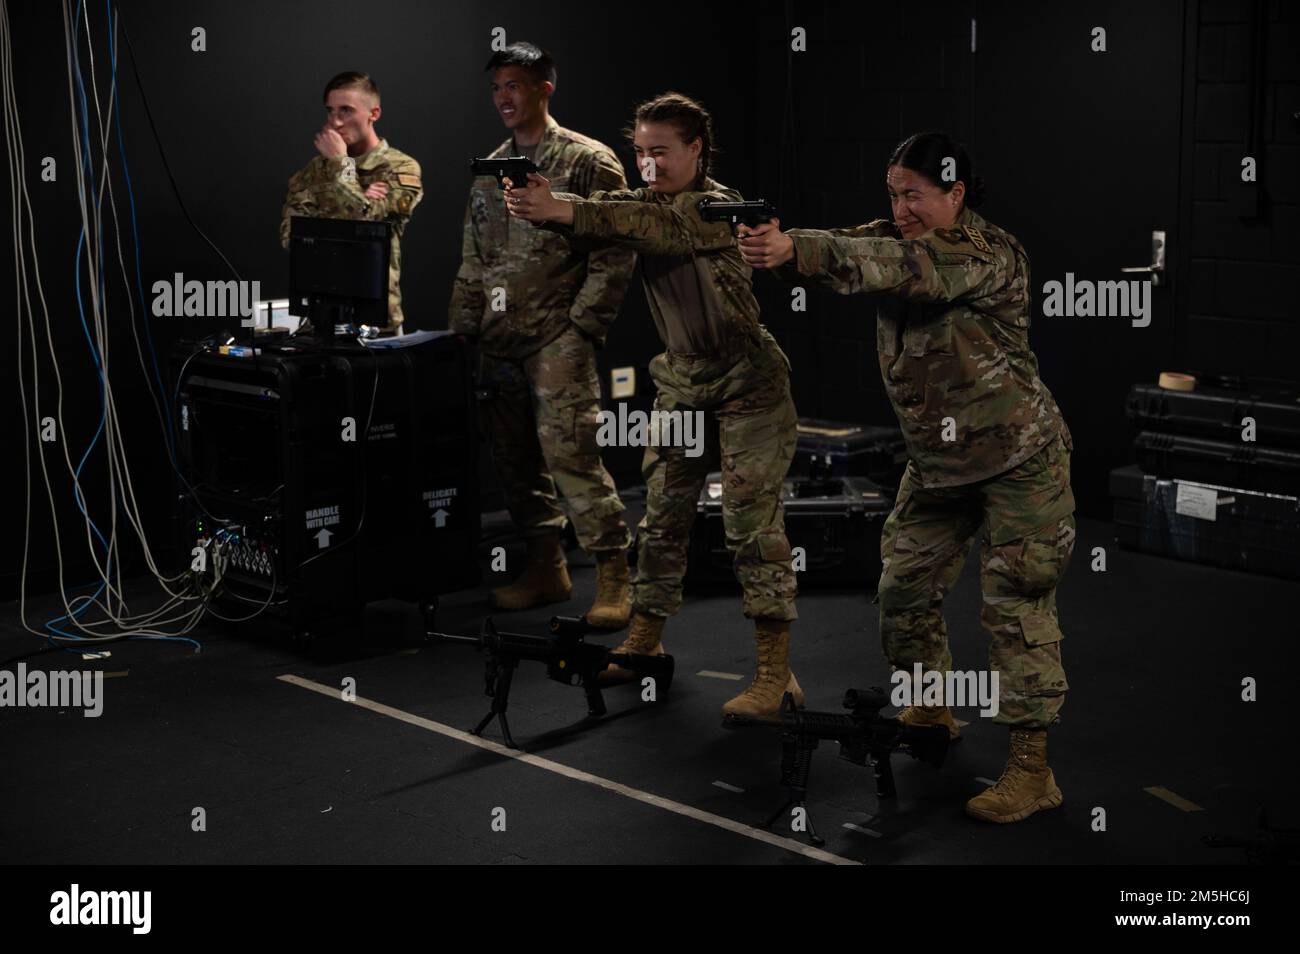 U.S. Air Force Airmen execute weapons simulation training during exercise Scorpion Lens at Joint Base Charleston, South Carolina, March 17, 2022. The 1st Combat Camera Squadron (1CTCS) holds Exercise Scorpion Lens annually to provide expeditionary skills training to Combat Camera Airmen. Stock Photo